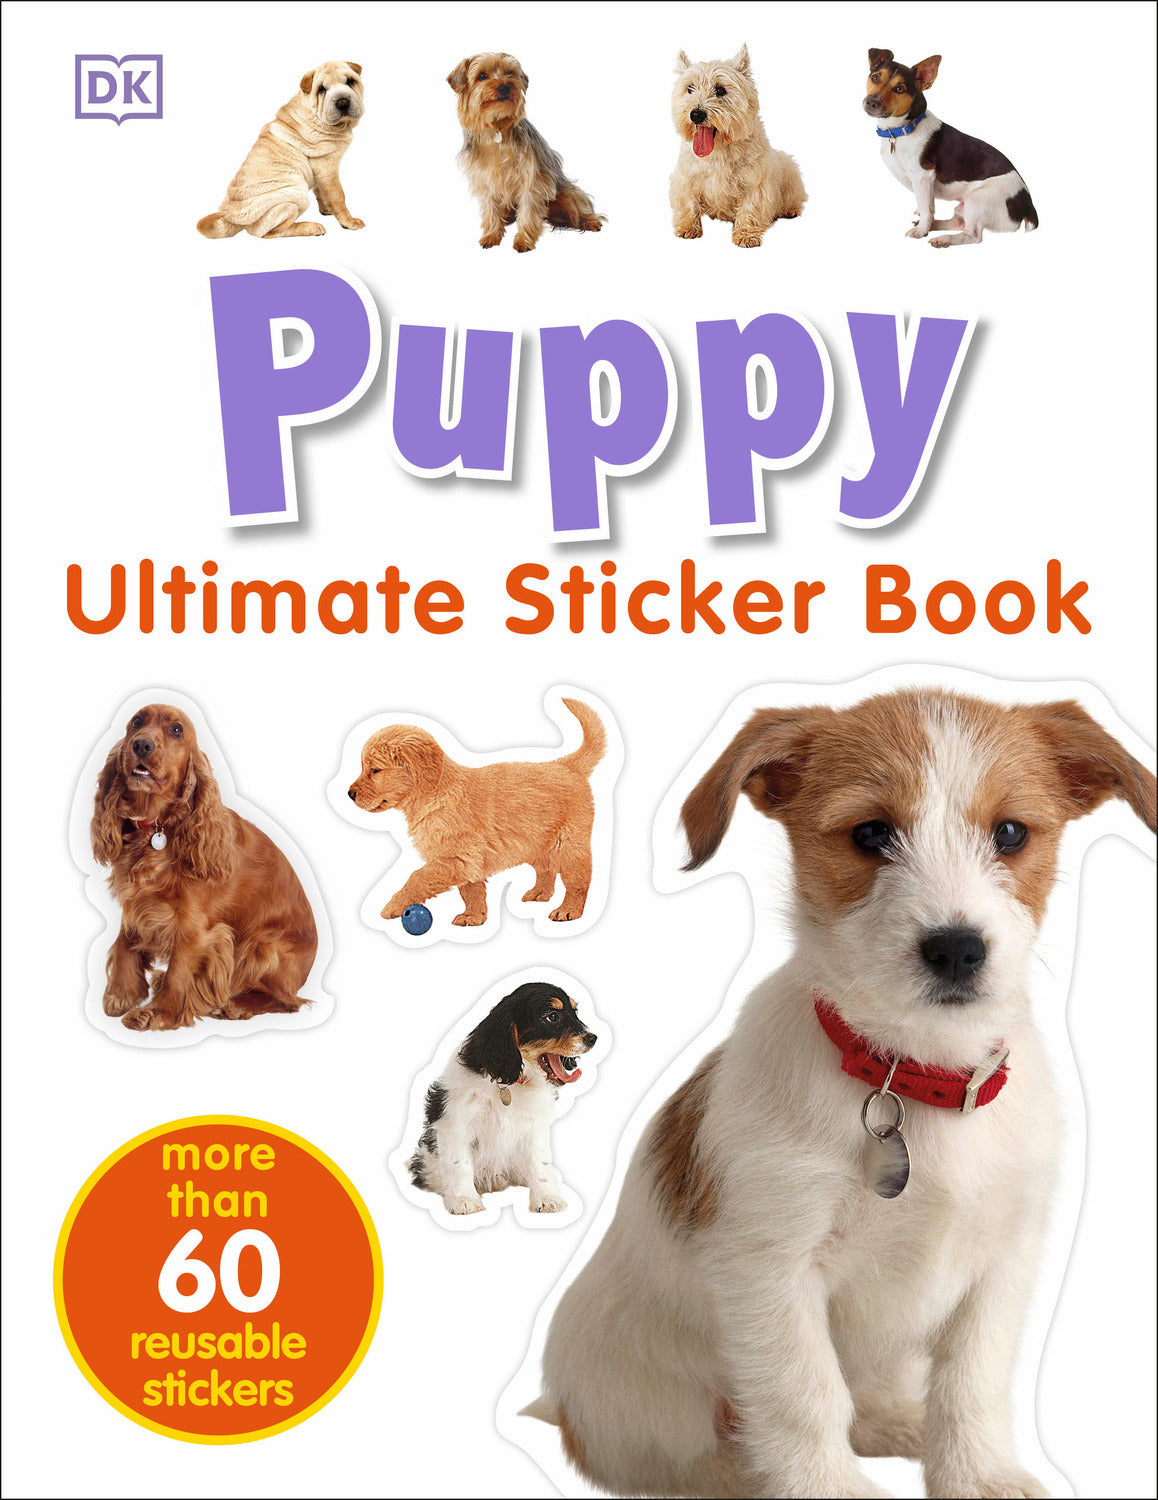 Ultimate Sticker Book: Puppy: More Than 60 Reusable Full-Color Stickers